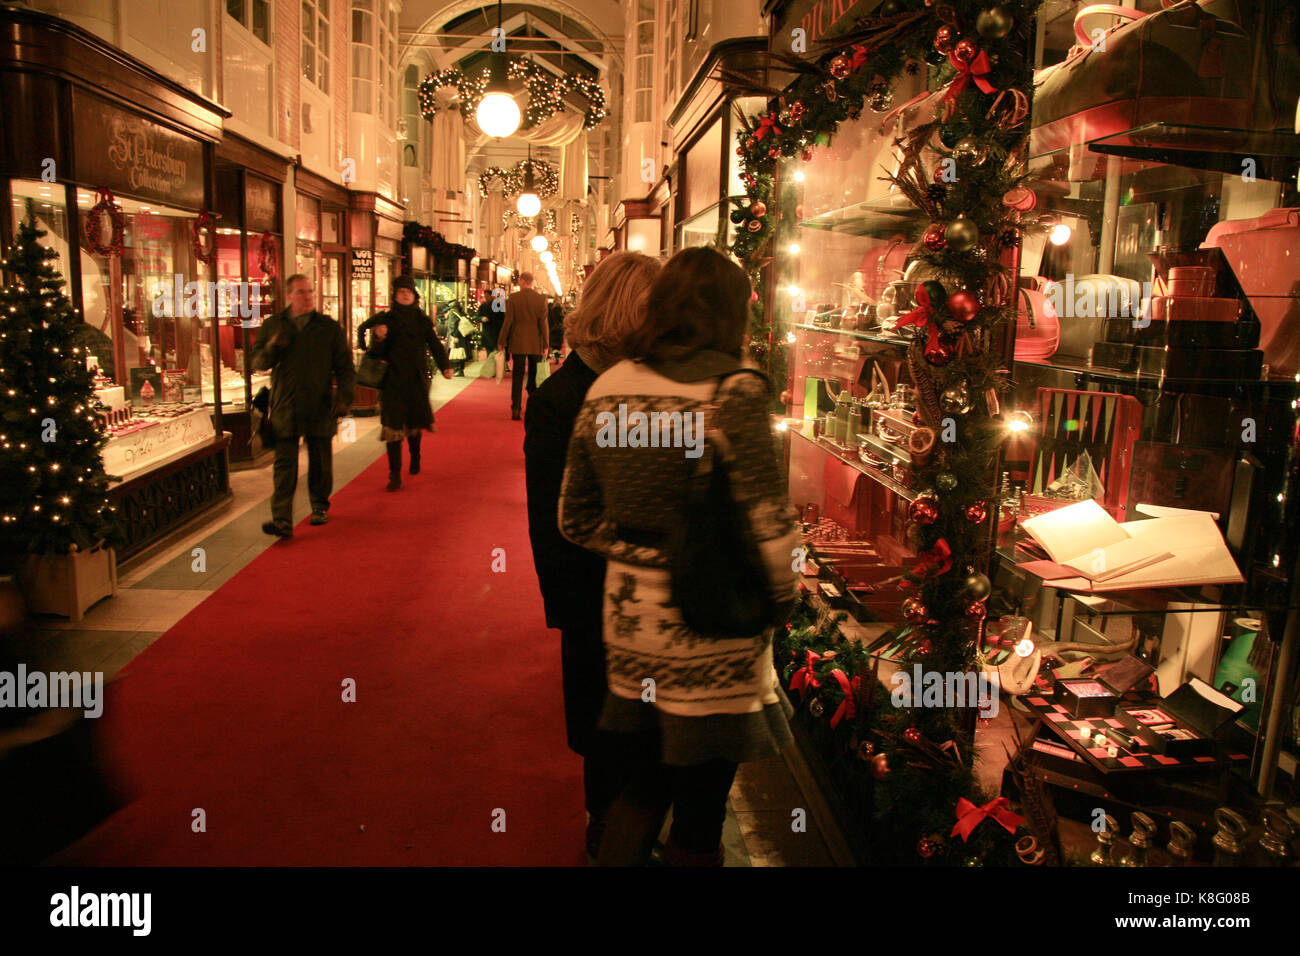 London, UK - December 21, 2010: Inside view of Burlington Arcade, 19th century European shopping gallery, behind Bond Street from Piccadilly through t Stock Photo